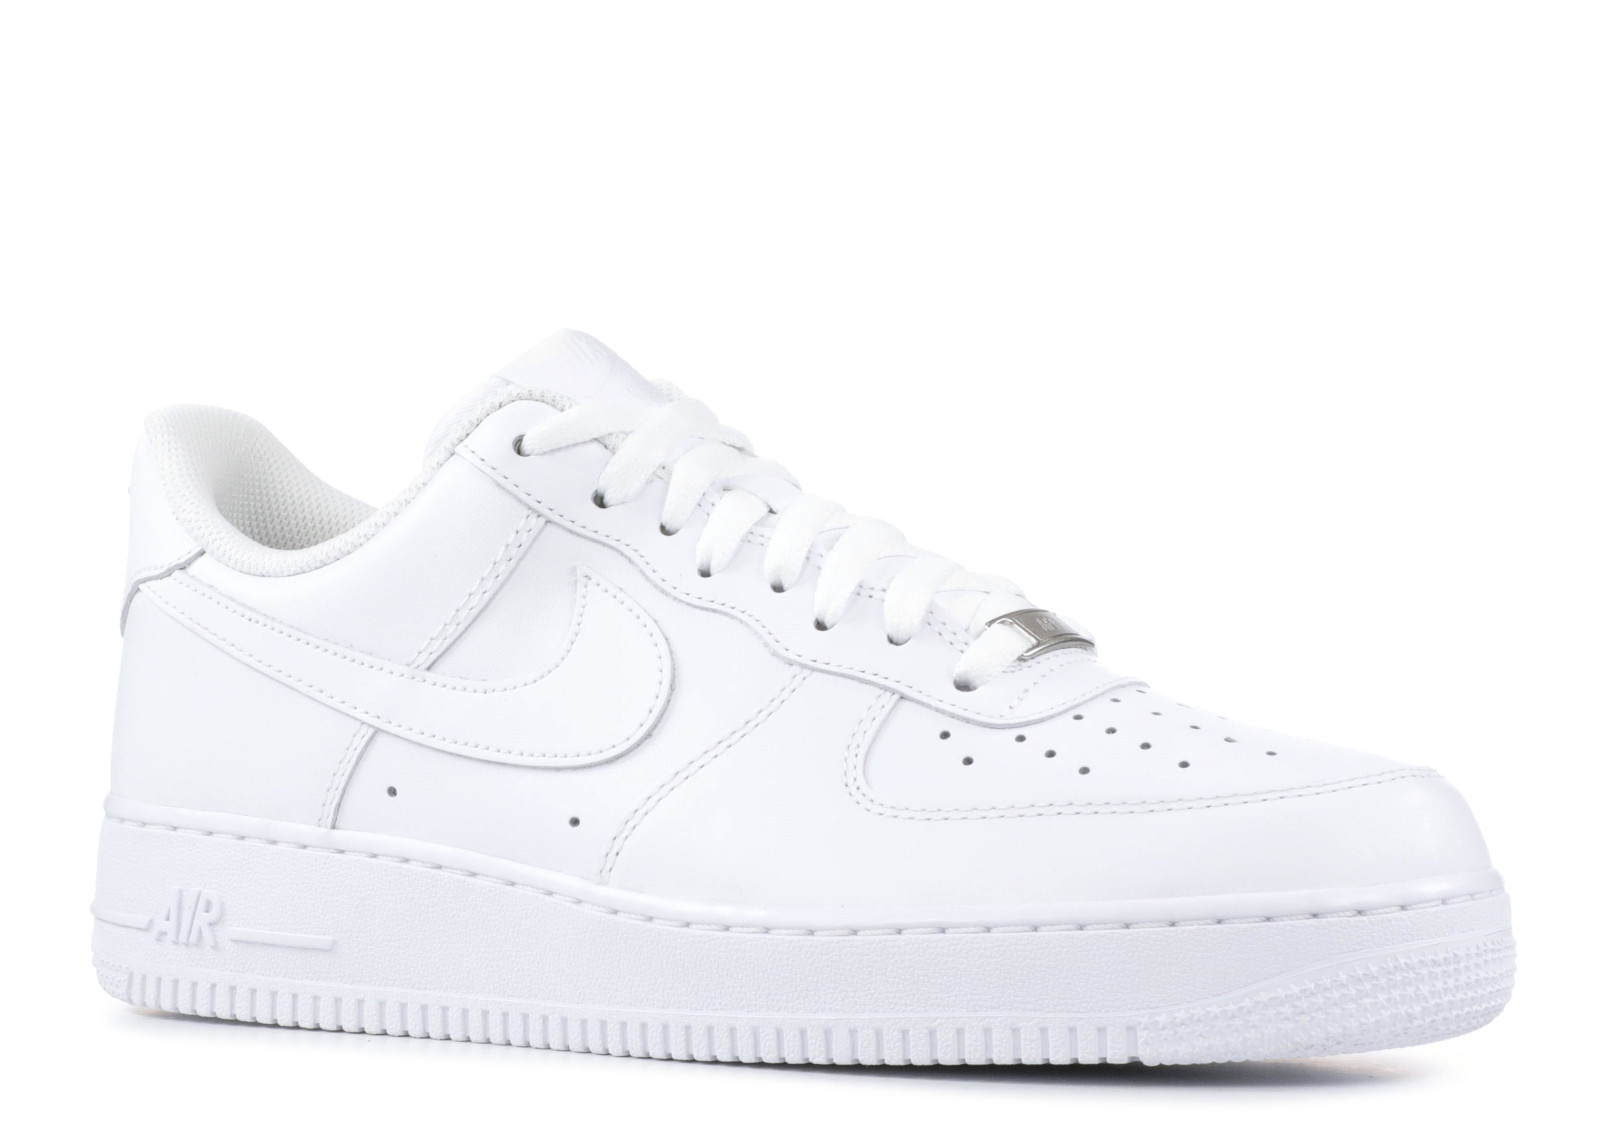 AIR FORCE 1 TRIPLE WHITE image 2